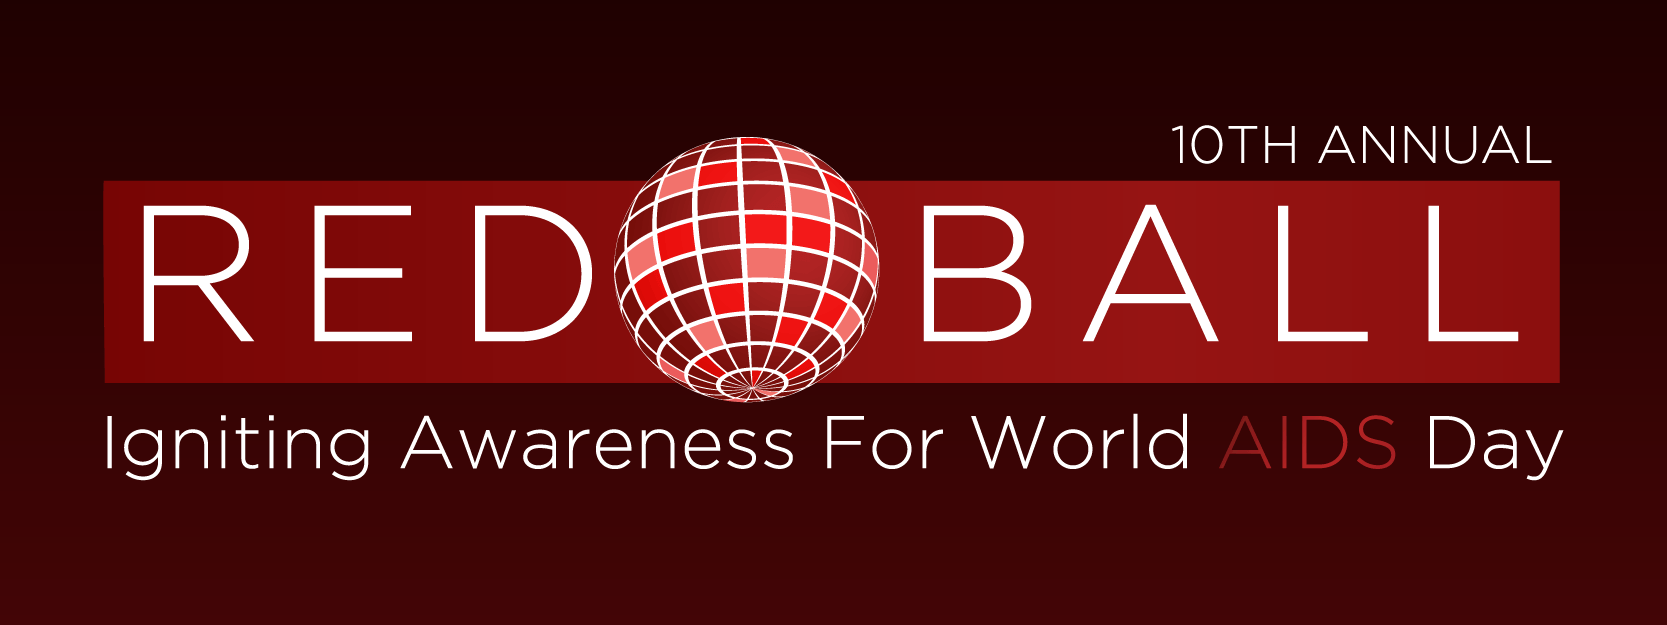 Red Ball Brand Logo - Red Ball - Igniting awareness of World AIDS Day – Sunday, December 1 ...